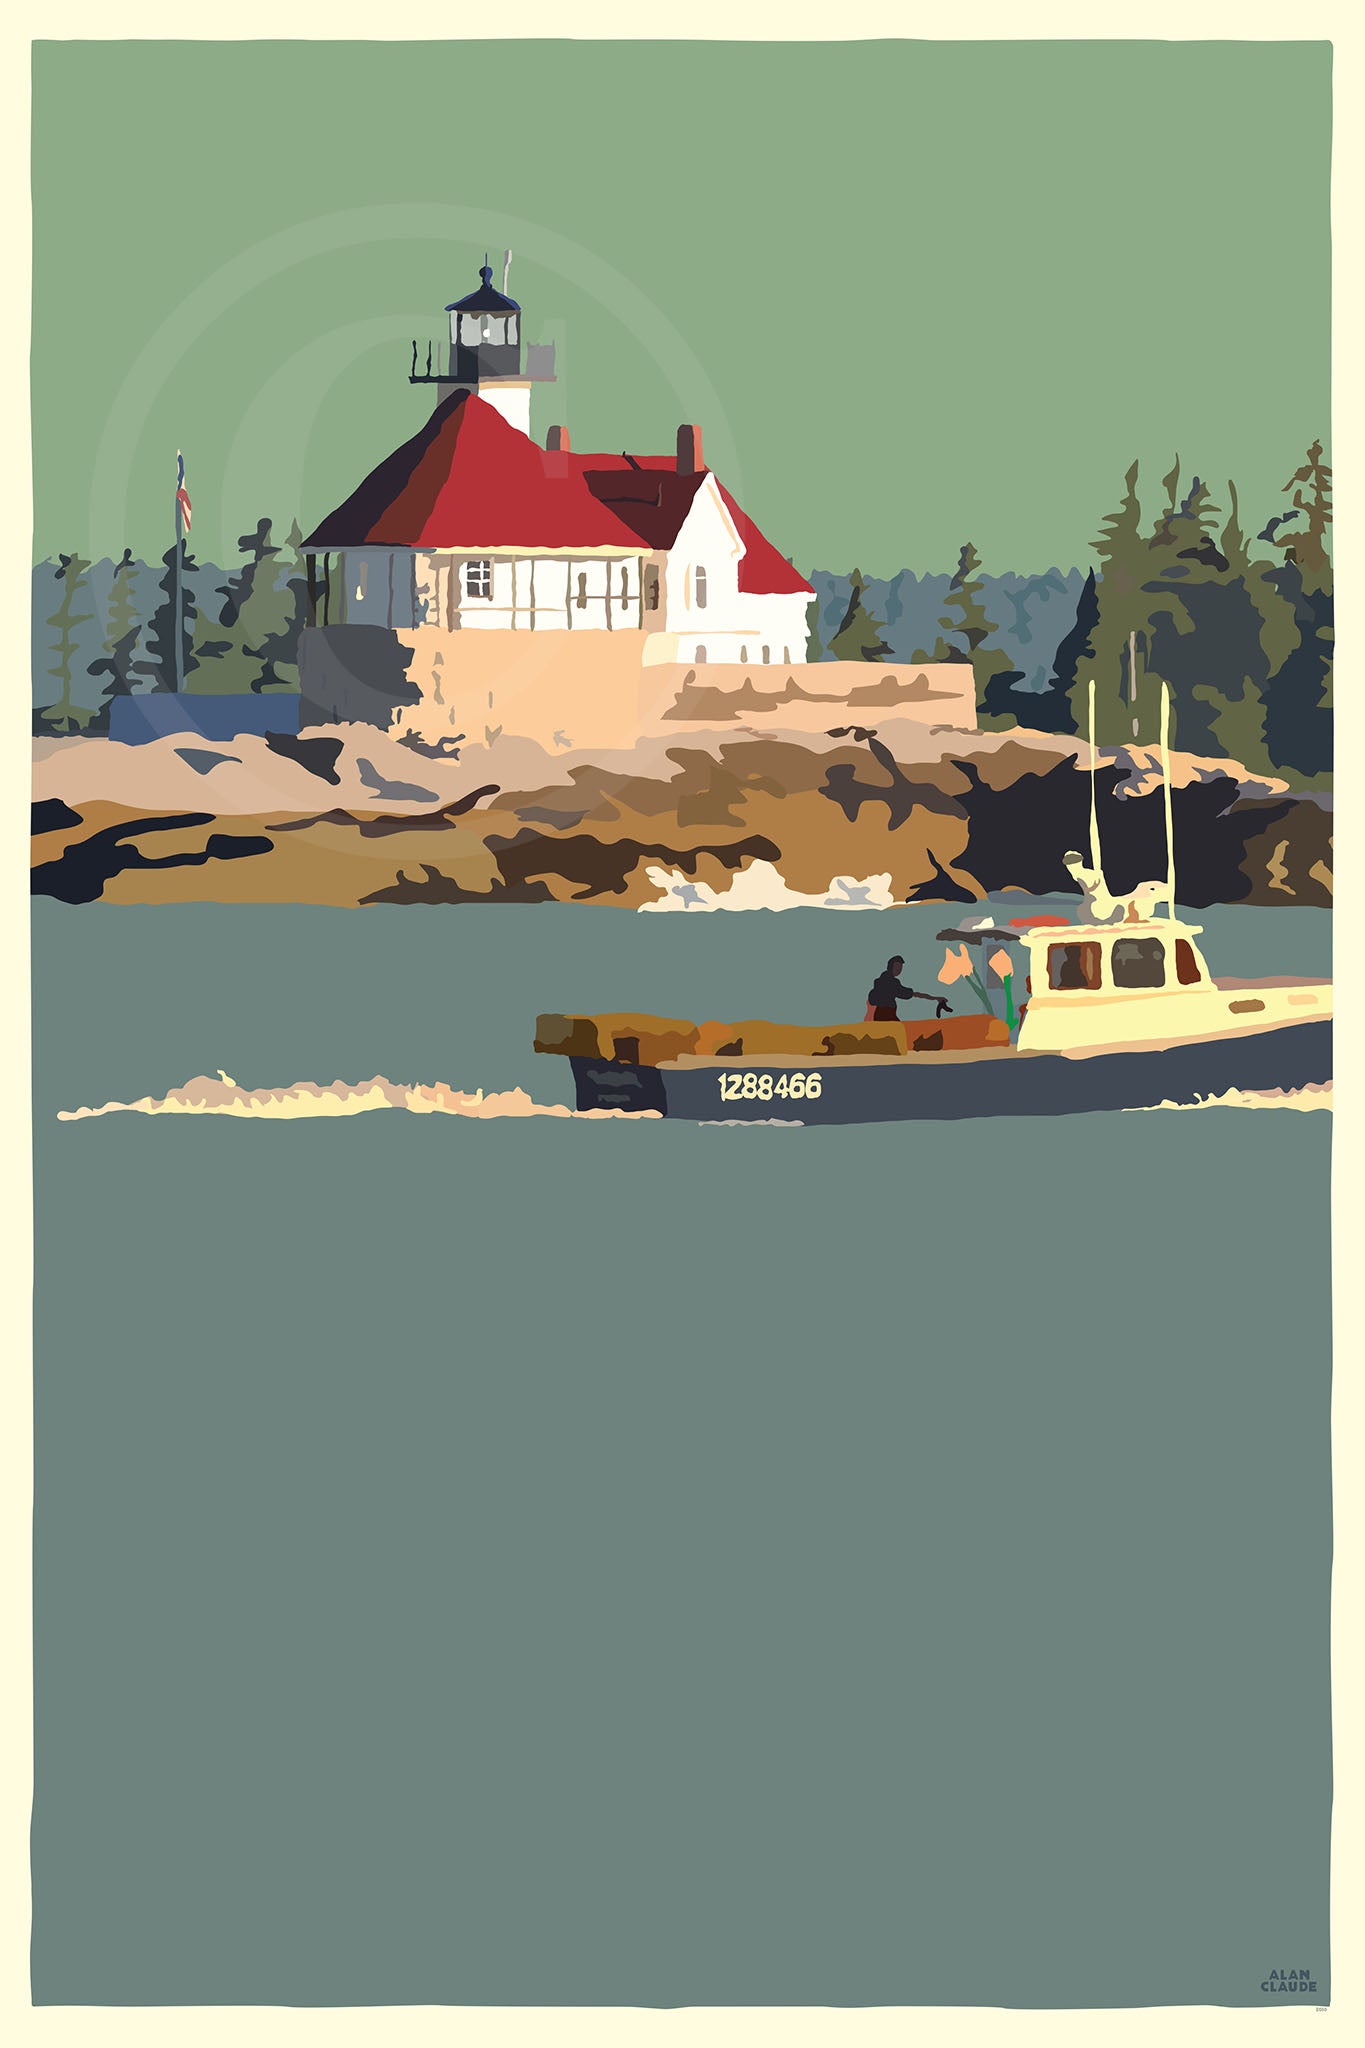 Lobstering At The Cuckolds Light Art Print 24" x 36" Wall Poster By Alan Claude - Maine